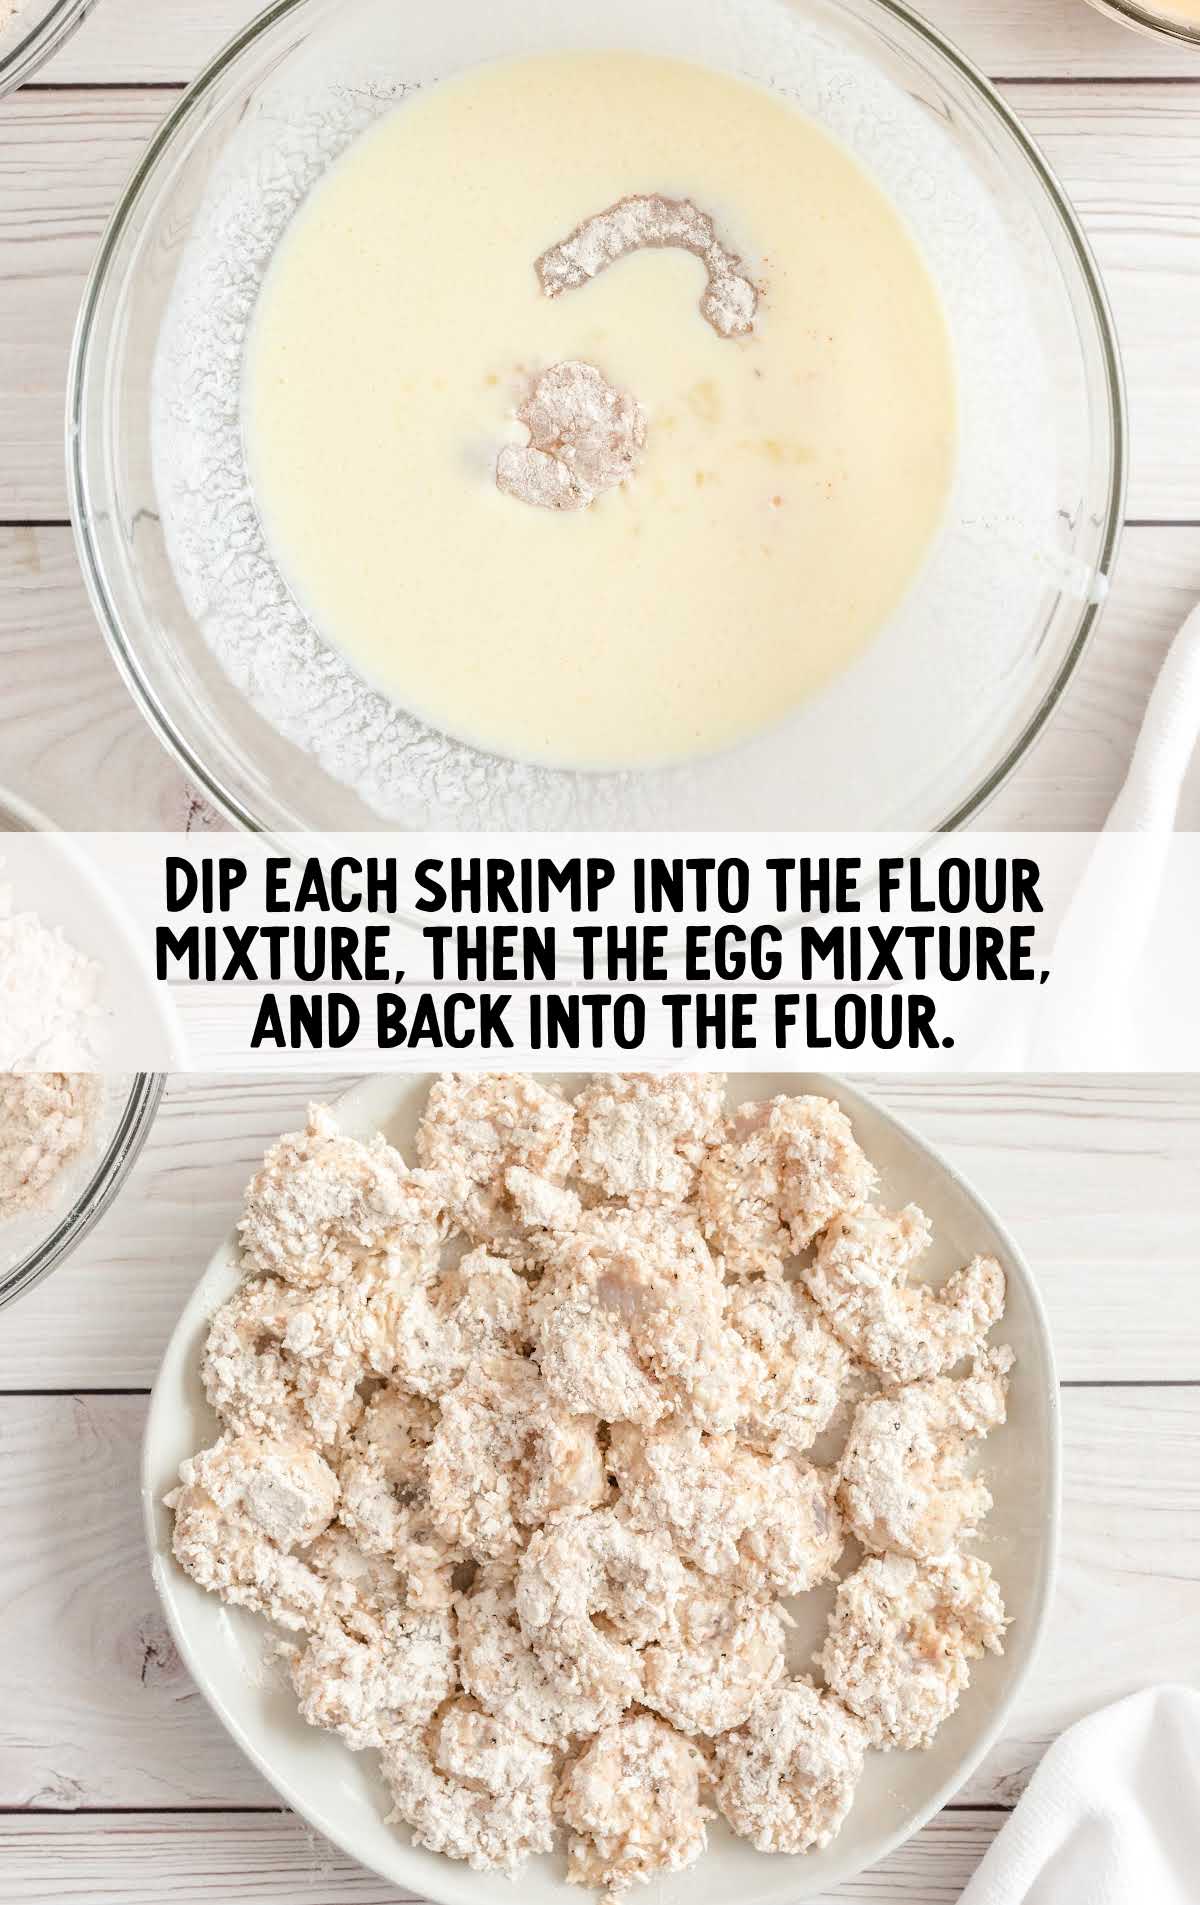 shrimp dipped into the egg mixture then into the flour mixture